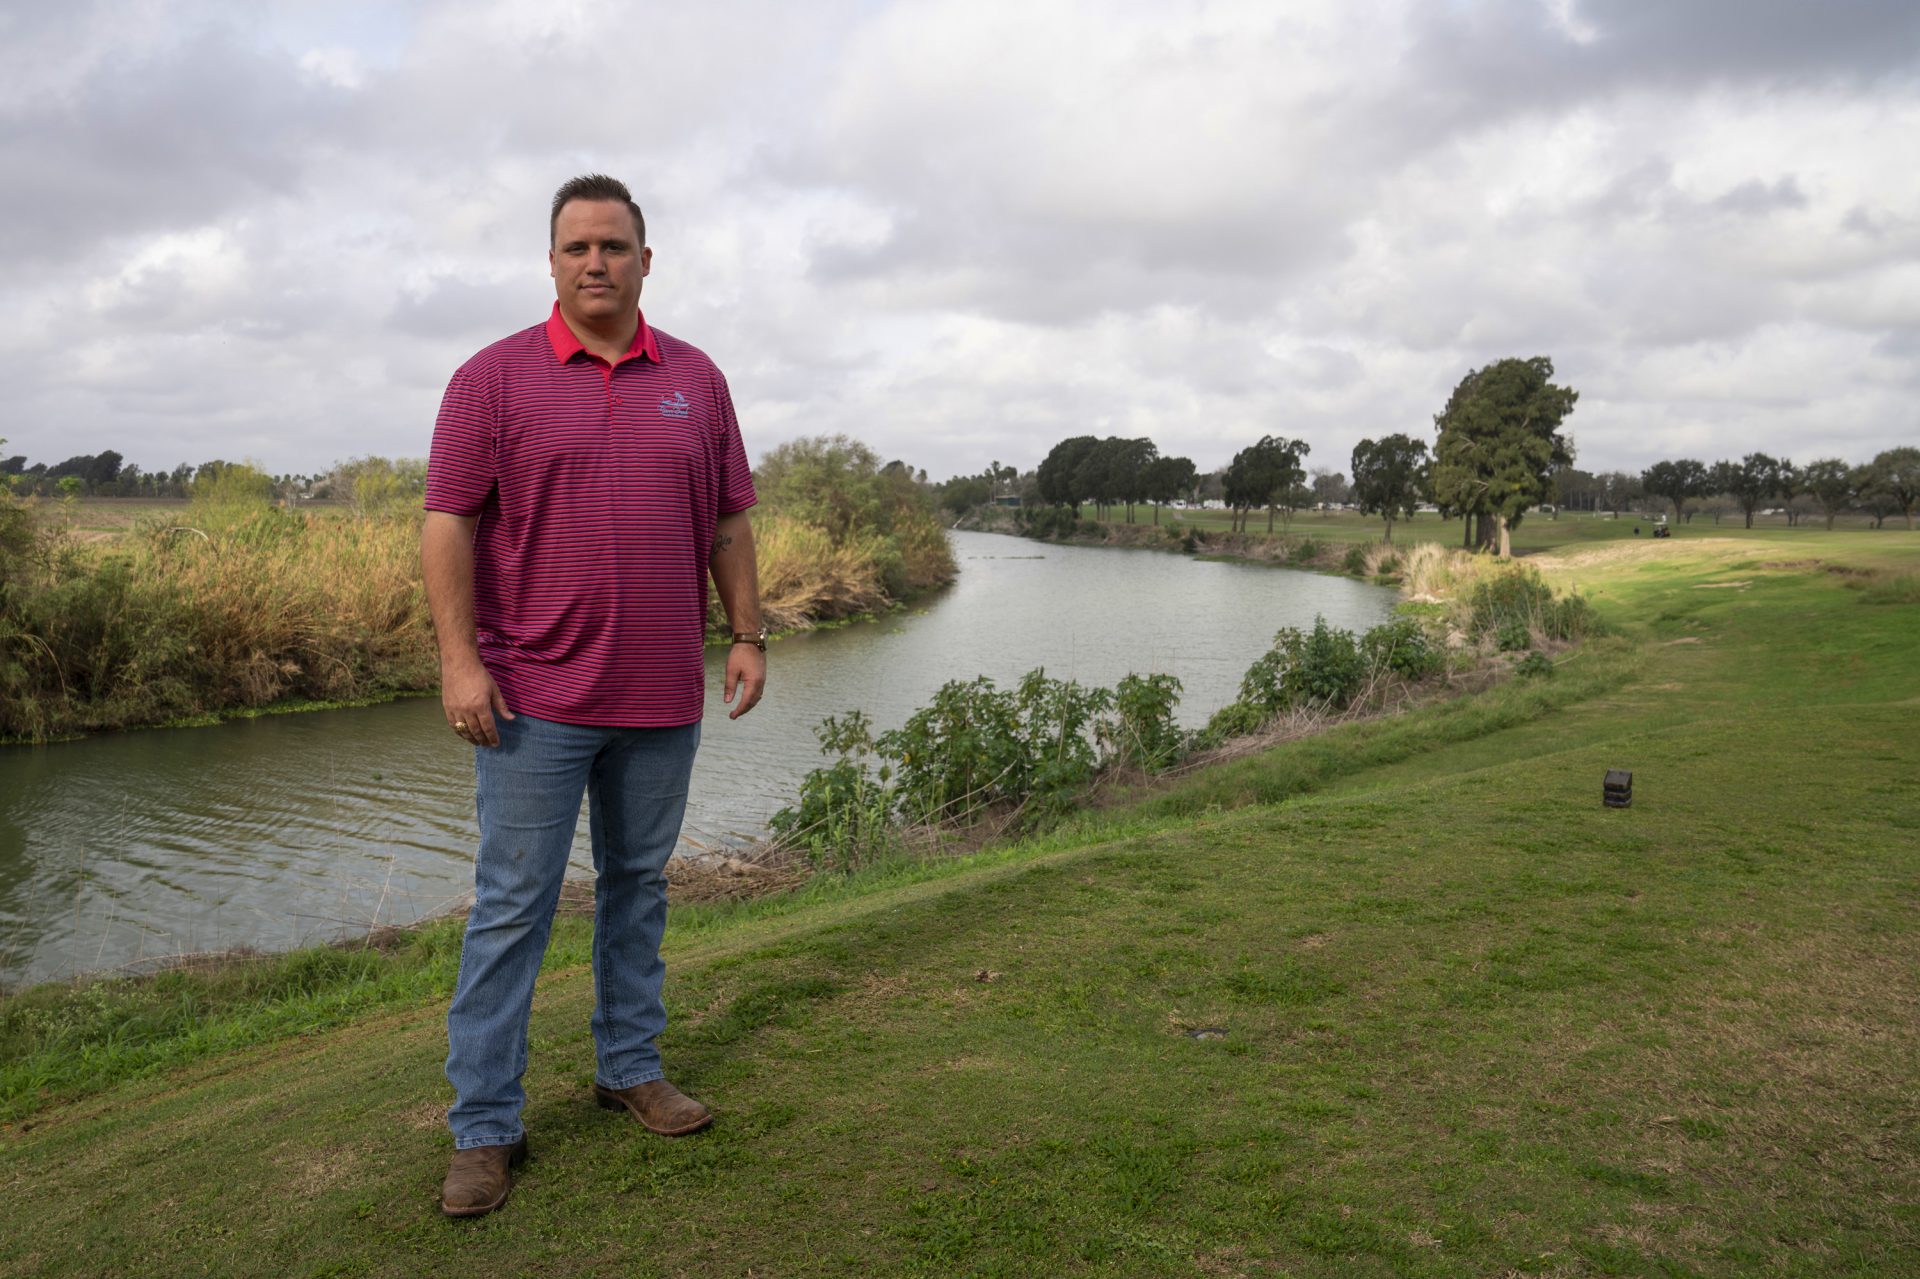 Jeremy Barnard's family owns the River Bend Resort & Golf Club in Brownsville, Texas. It was planning a major expansion, worth millions of dollars, then came the border wall.